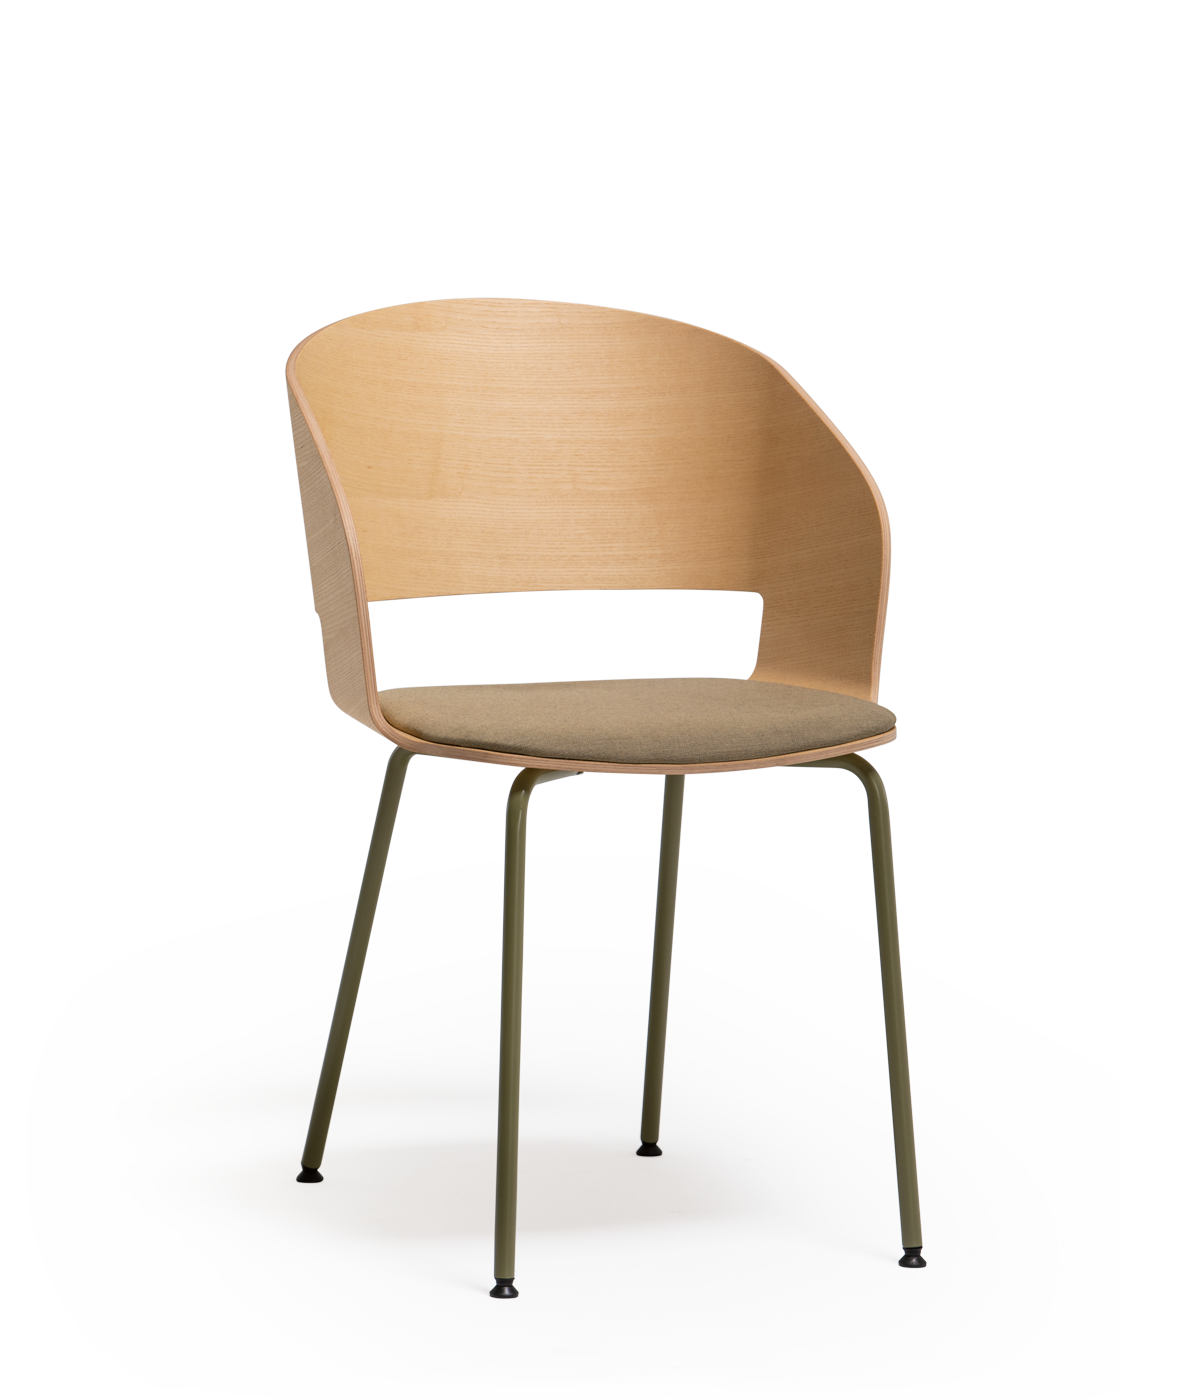 Vergés - Goose chair Model A with metallic armrests and legs